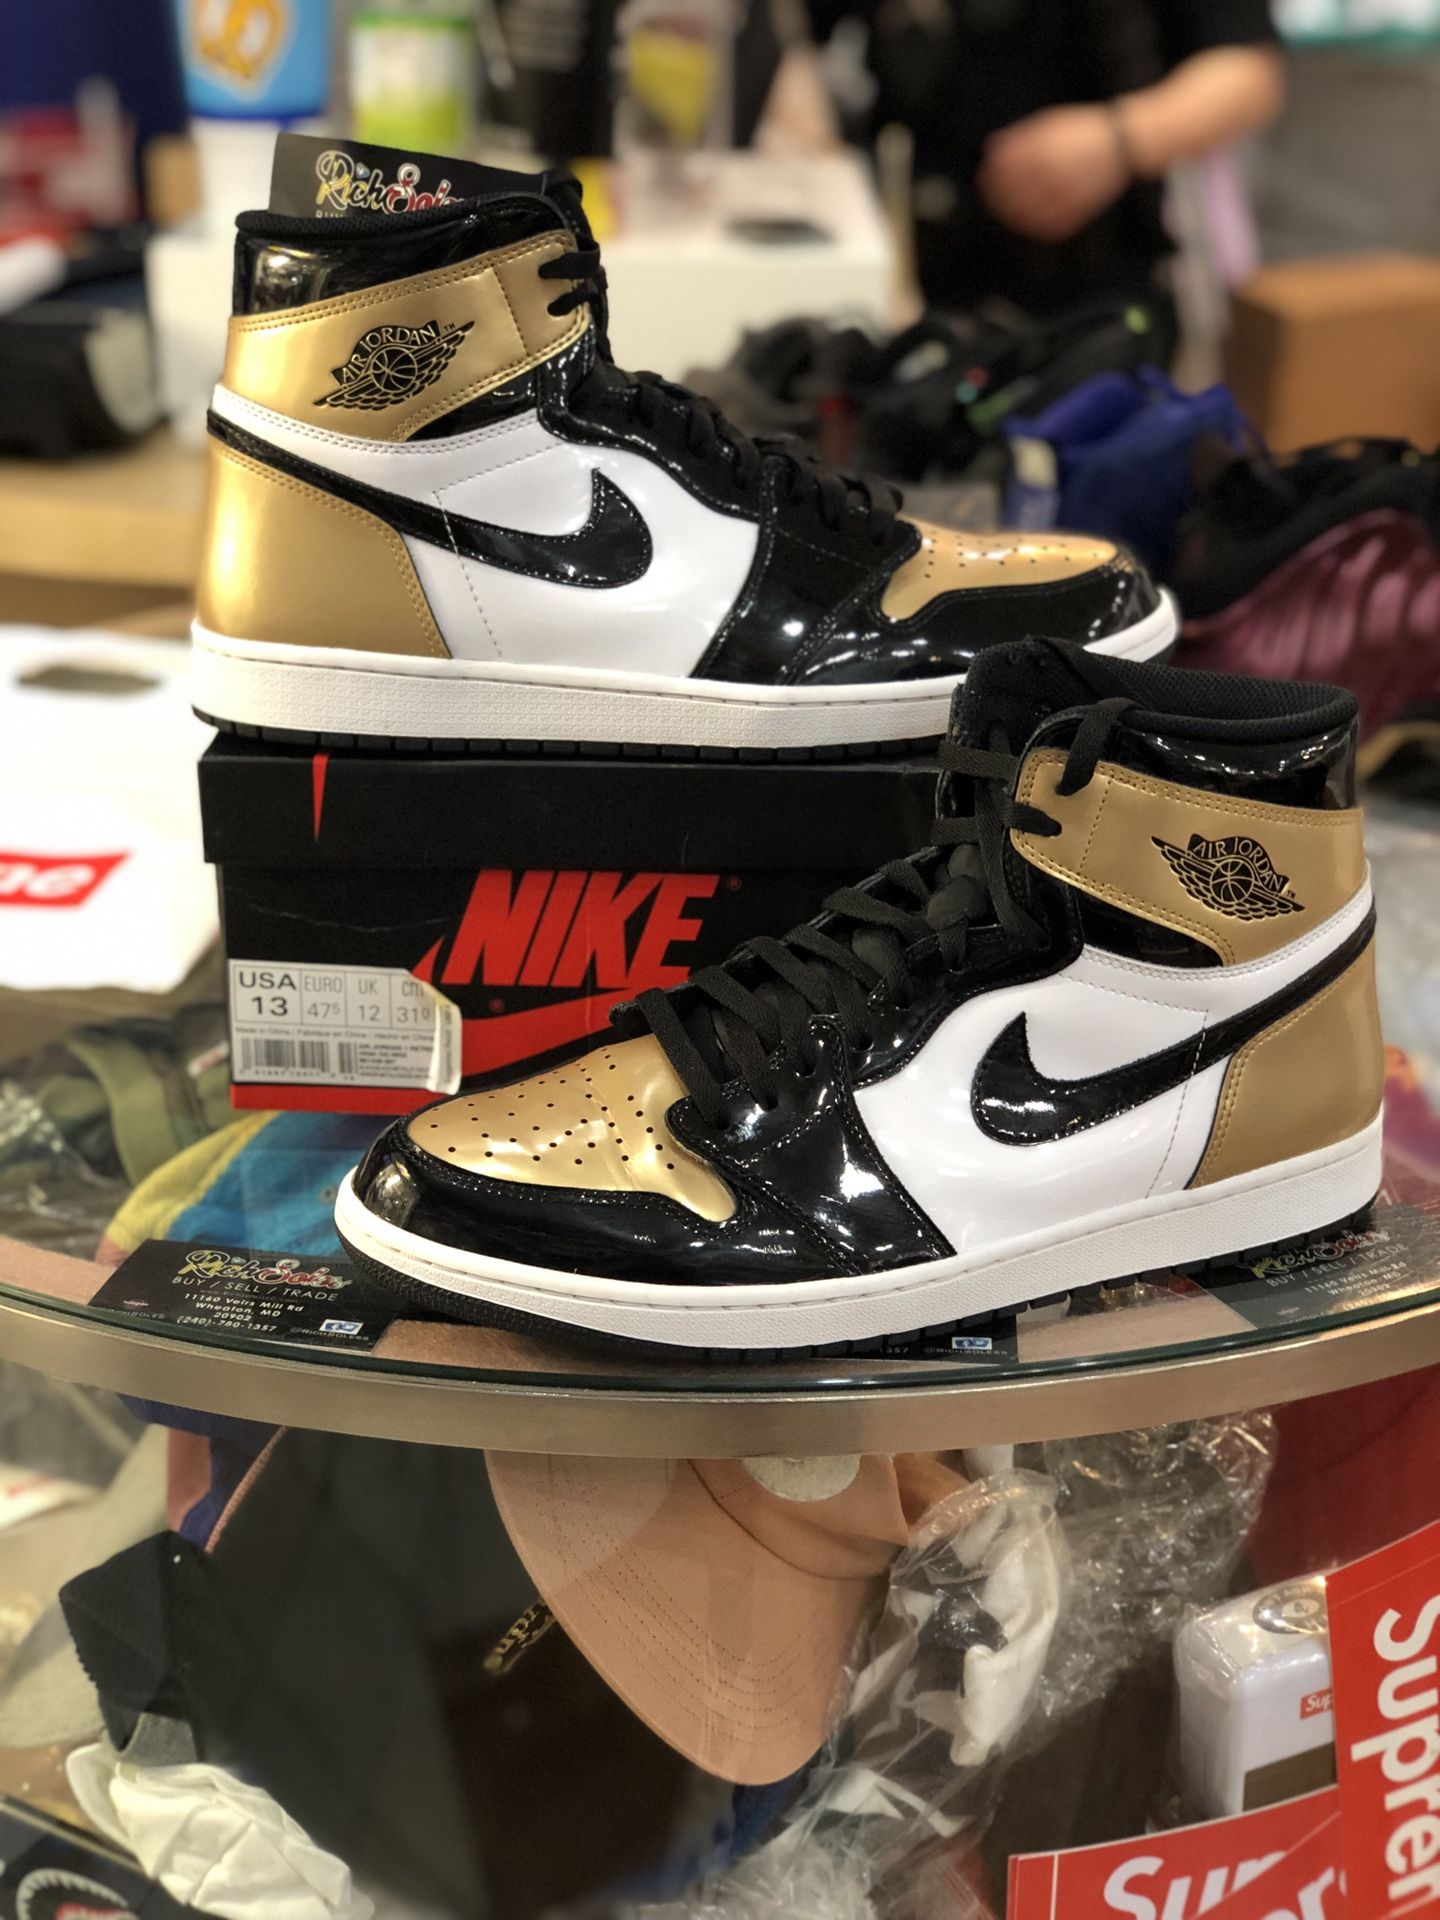 Gold Toe 1’s size 13